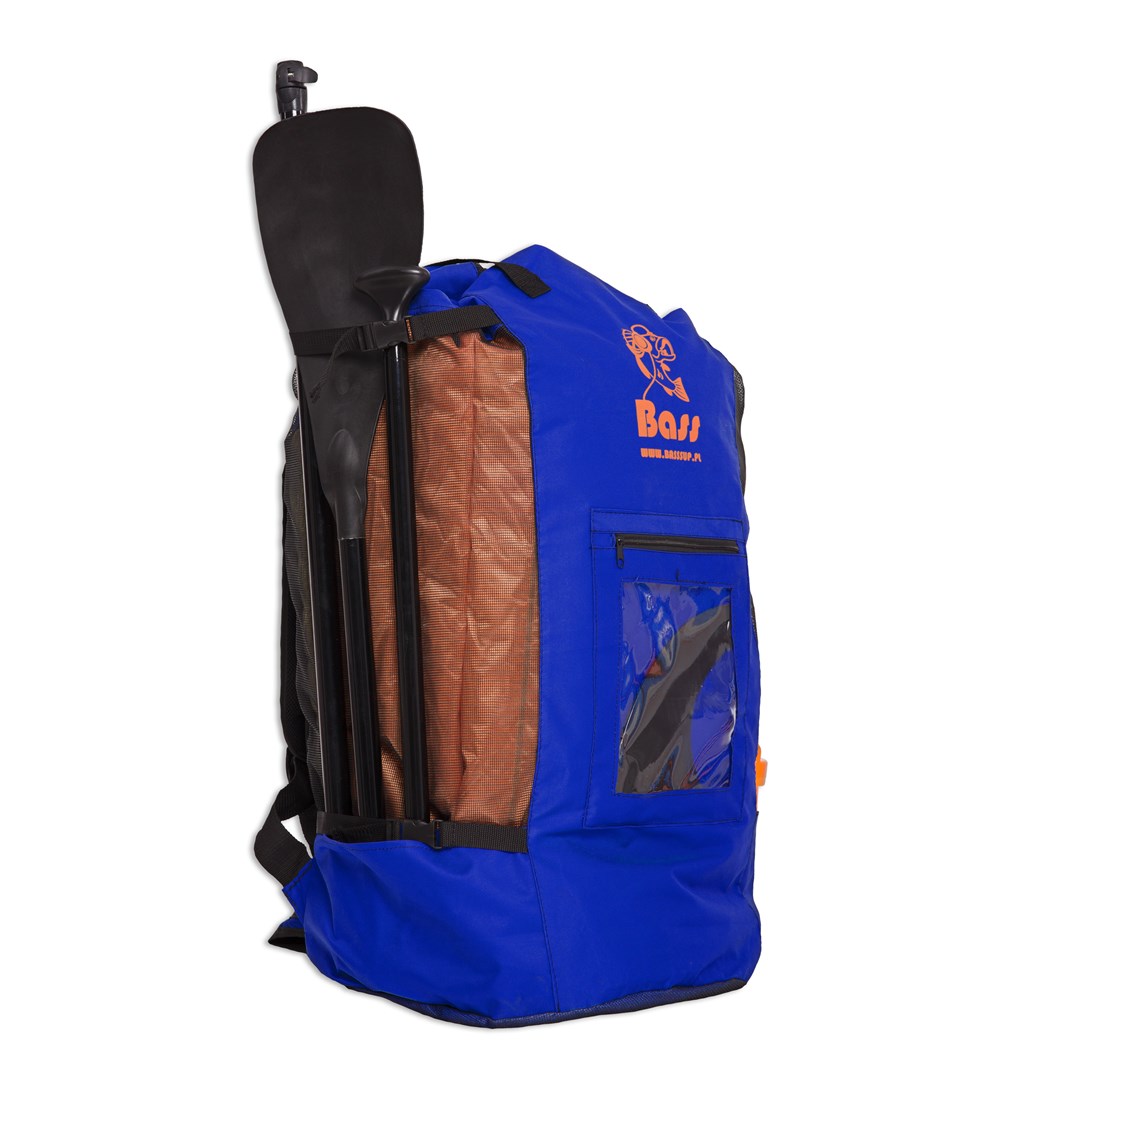 BASS Touring - Backpack